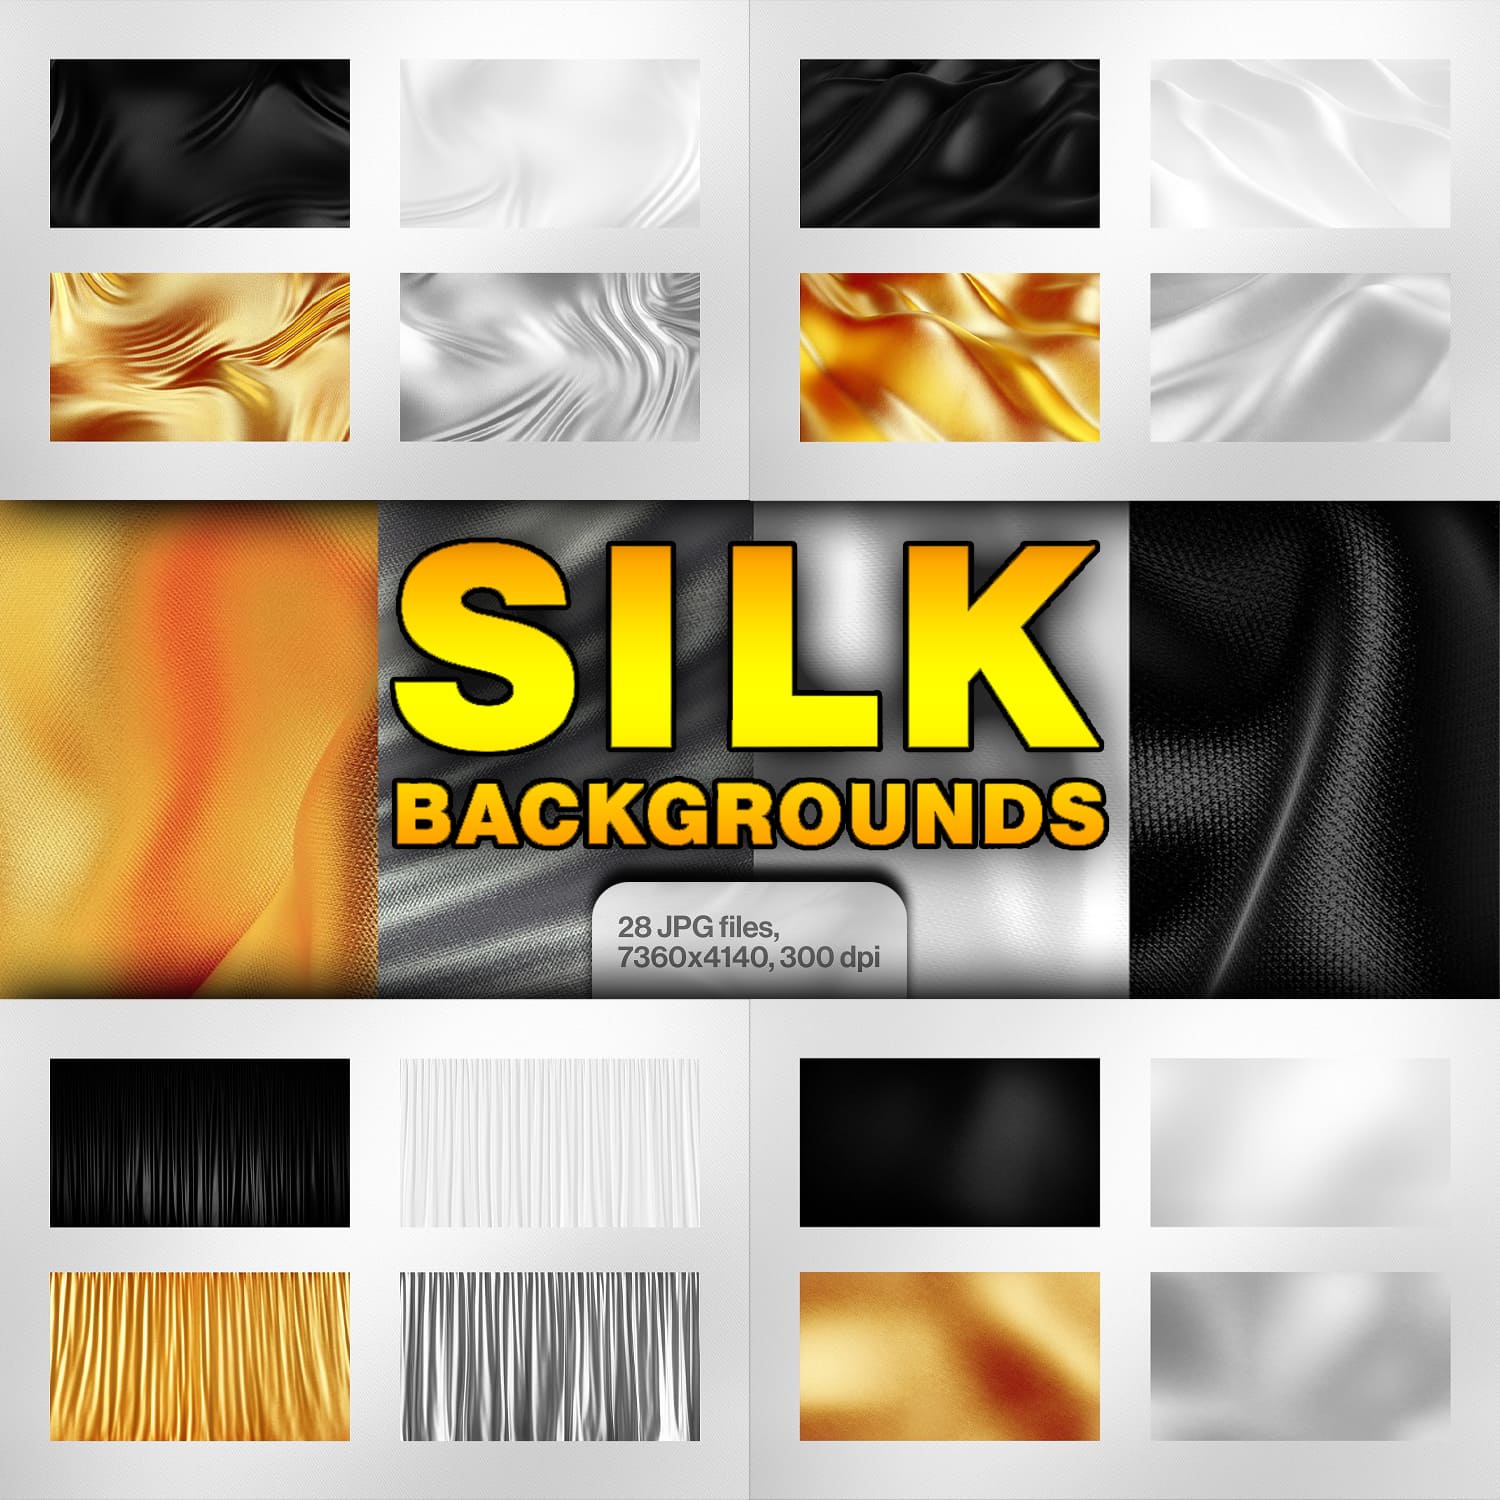 Silk Backgrounds created by Mockups & Illustrations.